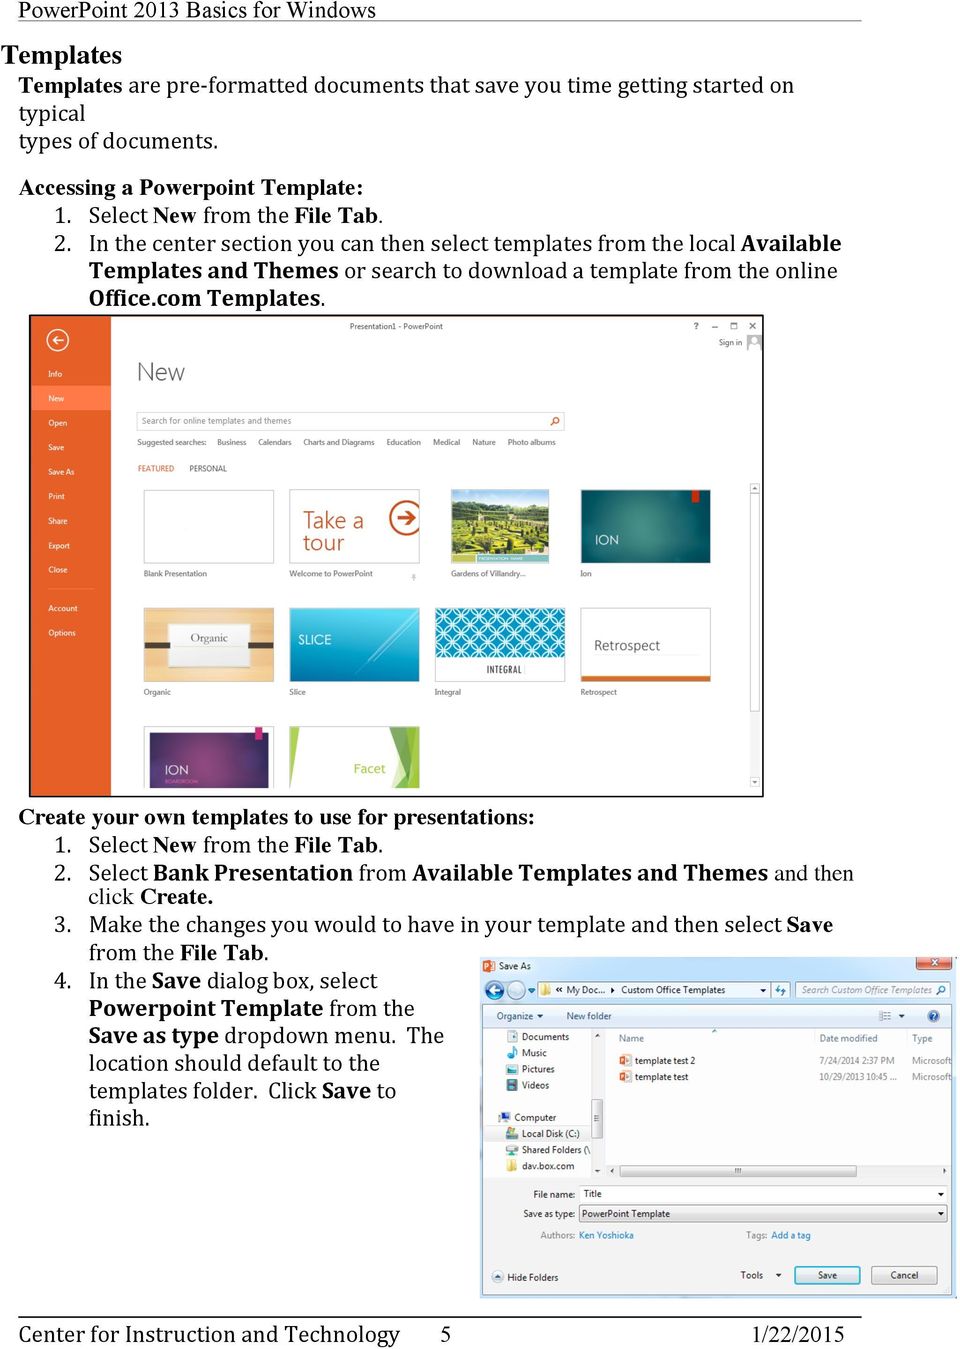 Create your own templates to use for presentations: 1. Select New from the File Tab. 2. Select Bank Presentation from Available Templates and Themes and then click Create. 3.